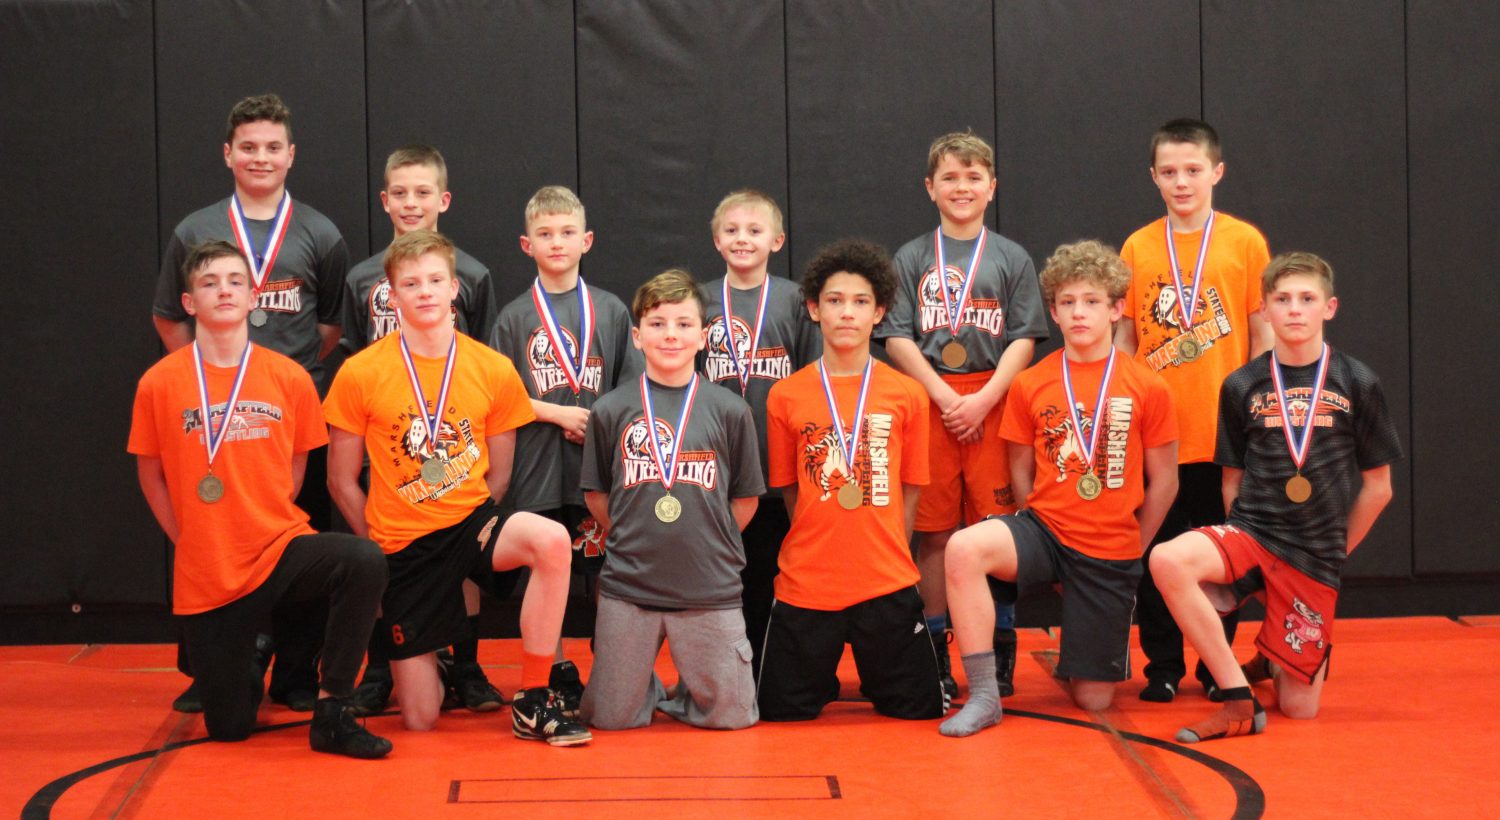 Marshfield youth wrestlers (front row from left) Gavin Young, Ryan Dolezal, Cody Weix, Gabe Pugh, Garrett Willuweit, Brett Franklin, (back row from left) Joey Carolfi, Owen Griesbach, Kashton Kilty, Kash Ostermann, Caleb Dennee, and Hoyt Blaskowski competed in the WWF Kids Folkstyle State Championships at the Alliant Energy Center in Madison March 24-25.  Seven of the twelve wrestlers placed at the tournament. Pugh and Blaskowski took second, Young came in third, Franklin and Carolfi were fourth, Willuweit finished fifth, and Dennee placed sixth.